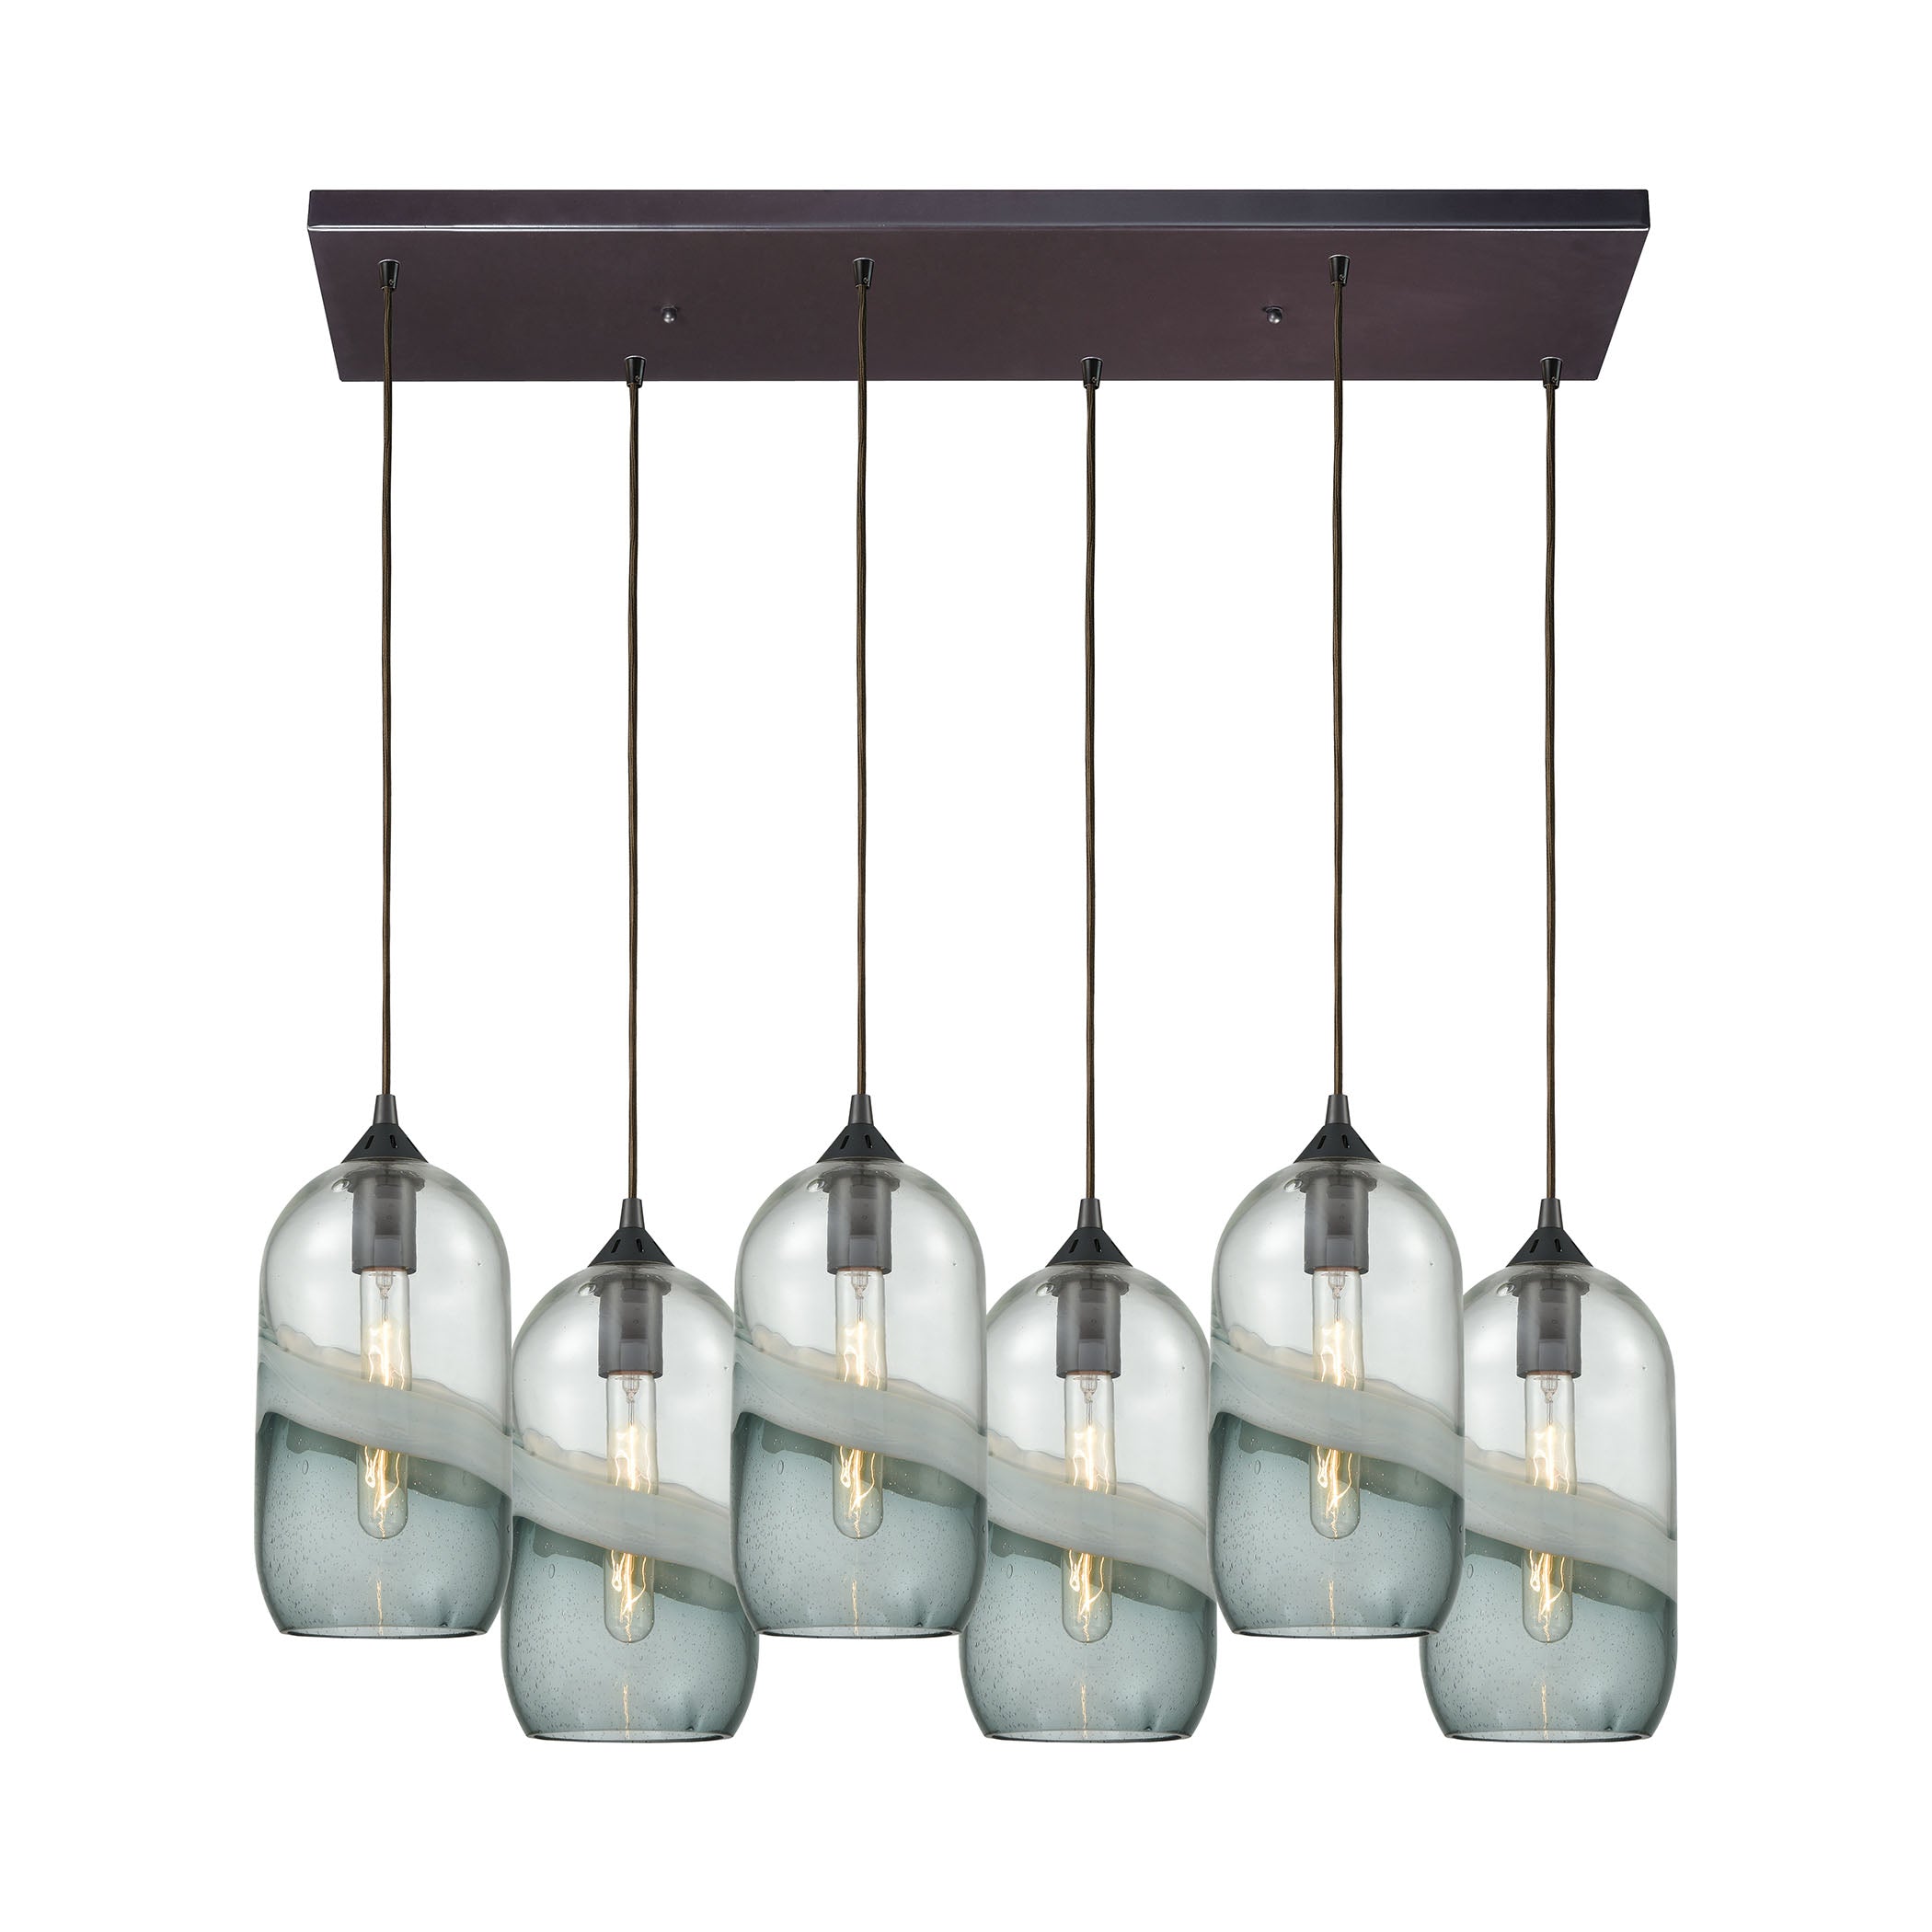 ELK Lighting 25102/6RC Sutter Creek 6-Light Rectangular Pendant Fixture in Oiled Bronze with Clear and Smoke Seedy Glass